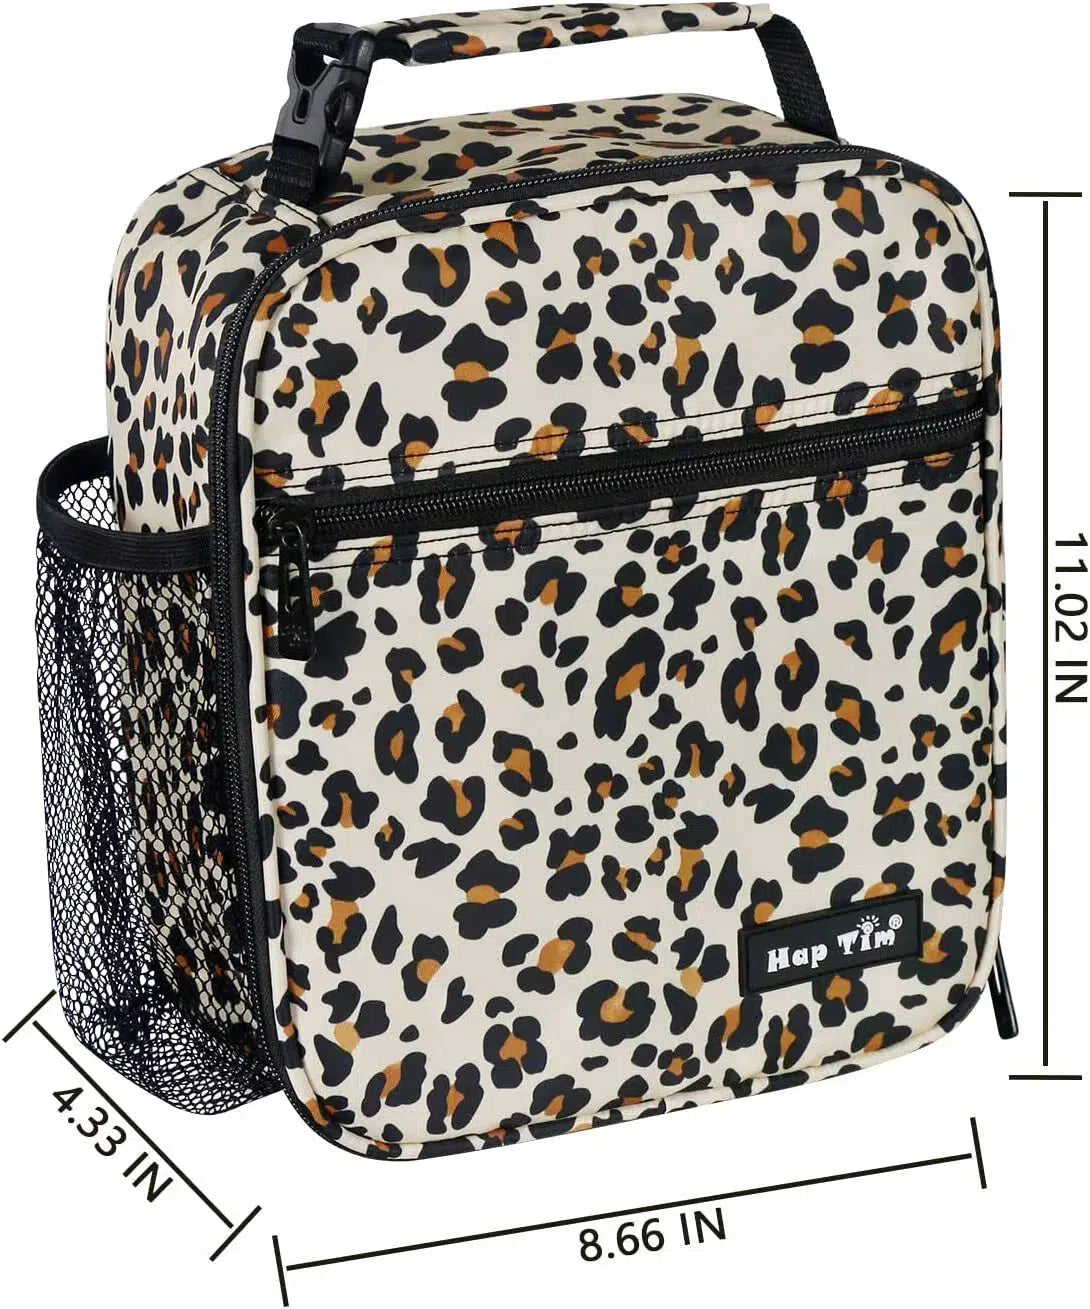 Bunnybento Insulated Lunch Box Leopard Print